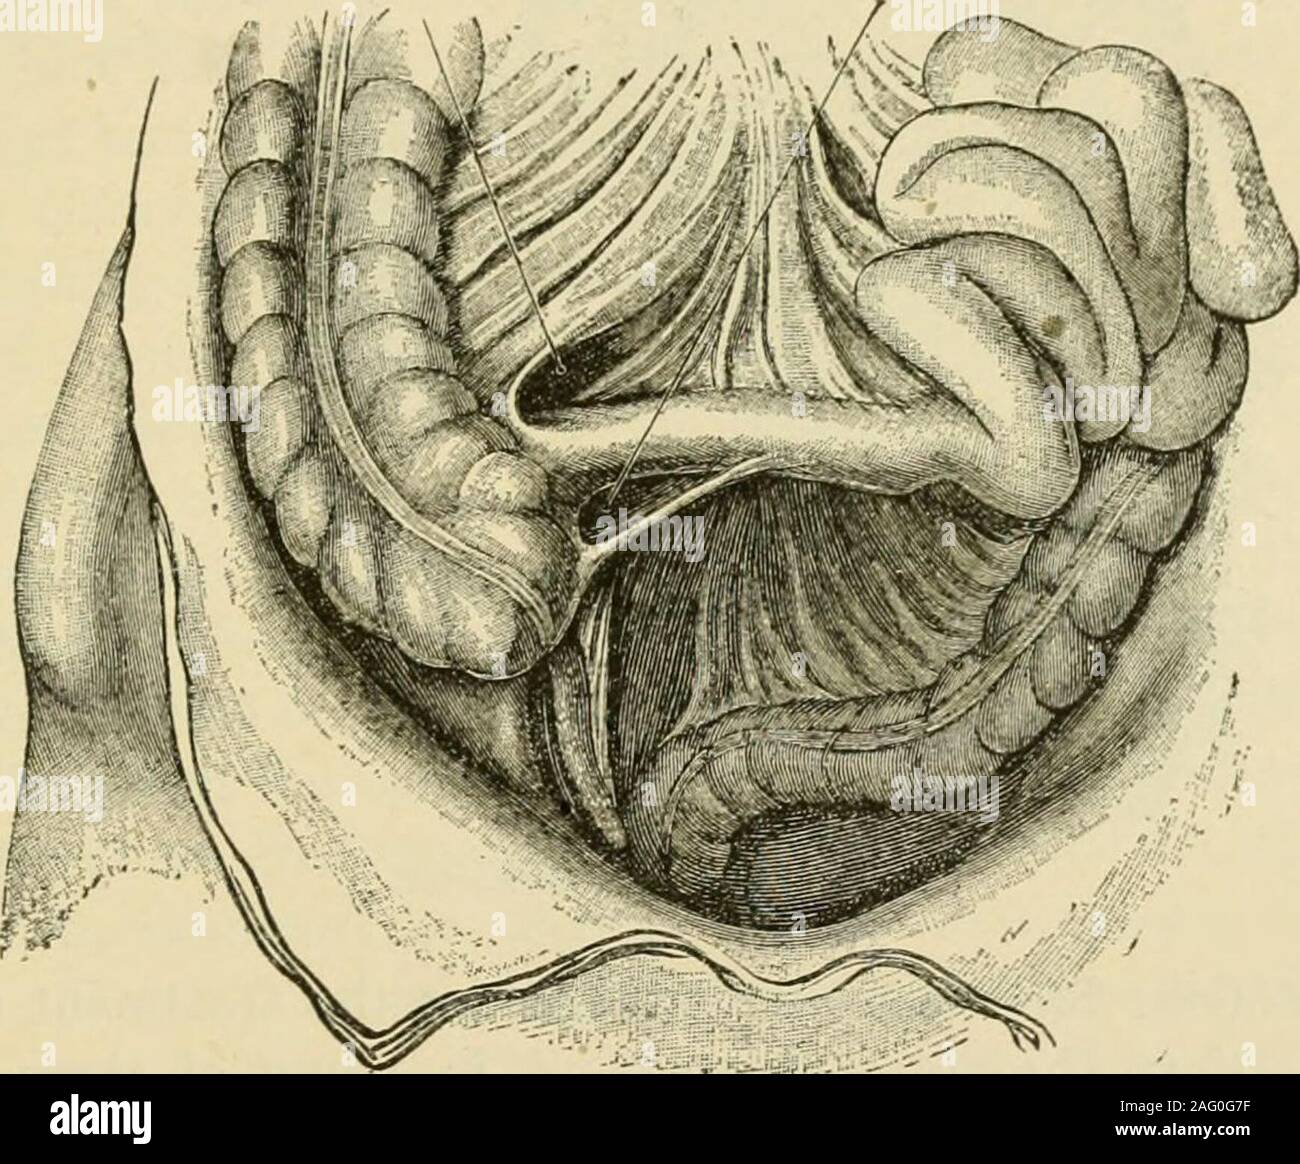 . Manual of operative surgery. ral varieties of recess in this situation,but for our purposes the recognition of its existence and of its proneness to vary,suffices. Intestine may bore its way into the recess described, enlarging theopening and forming a retro-peritoneal hernia (Treitzs hernia). The pouchformed by the herniated gut may stretch to the left under the descending colonand downwards to the pelvis. Upwards the hernia may pass under the rootof the transverse mesocolon to a position behind the stomach and spleen.Strangulation is rare. It is commonly supposed that small intestine alone Stock Photo